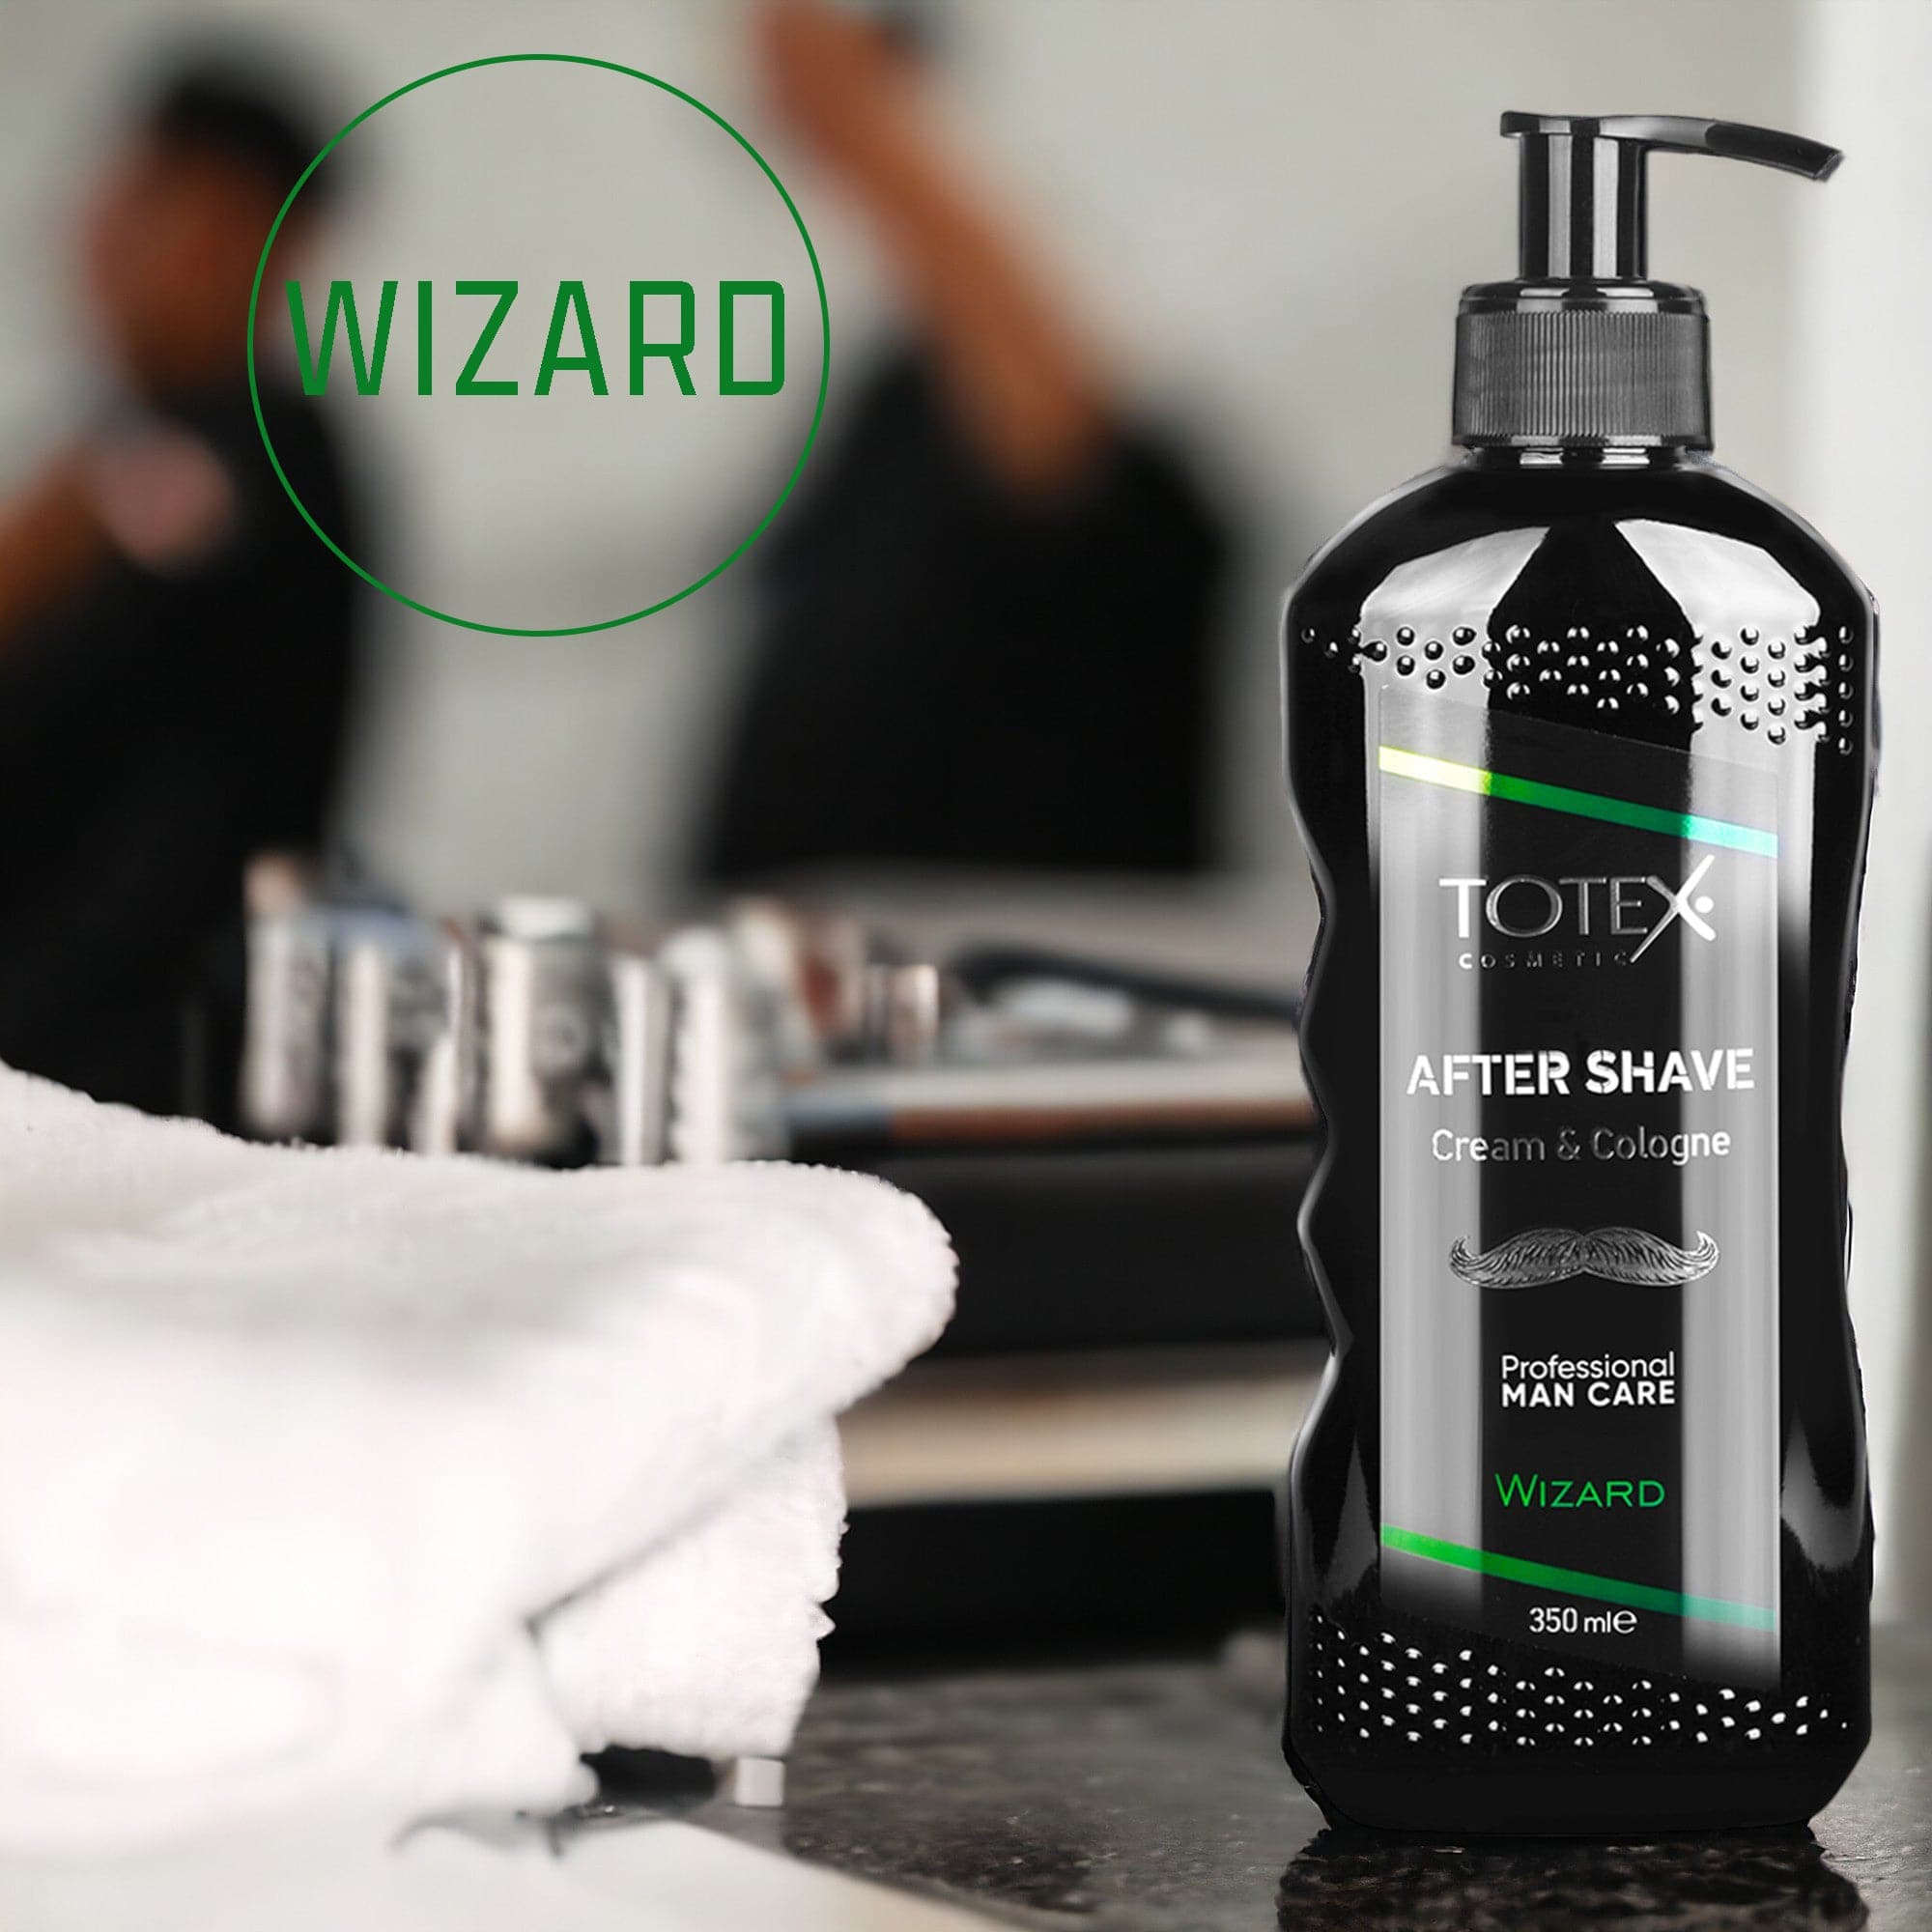 Totex - After Shave Cream & Cologne Wizard 350ml